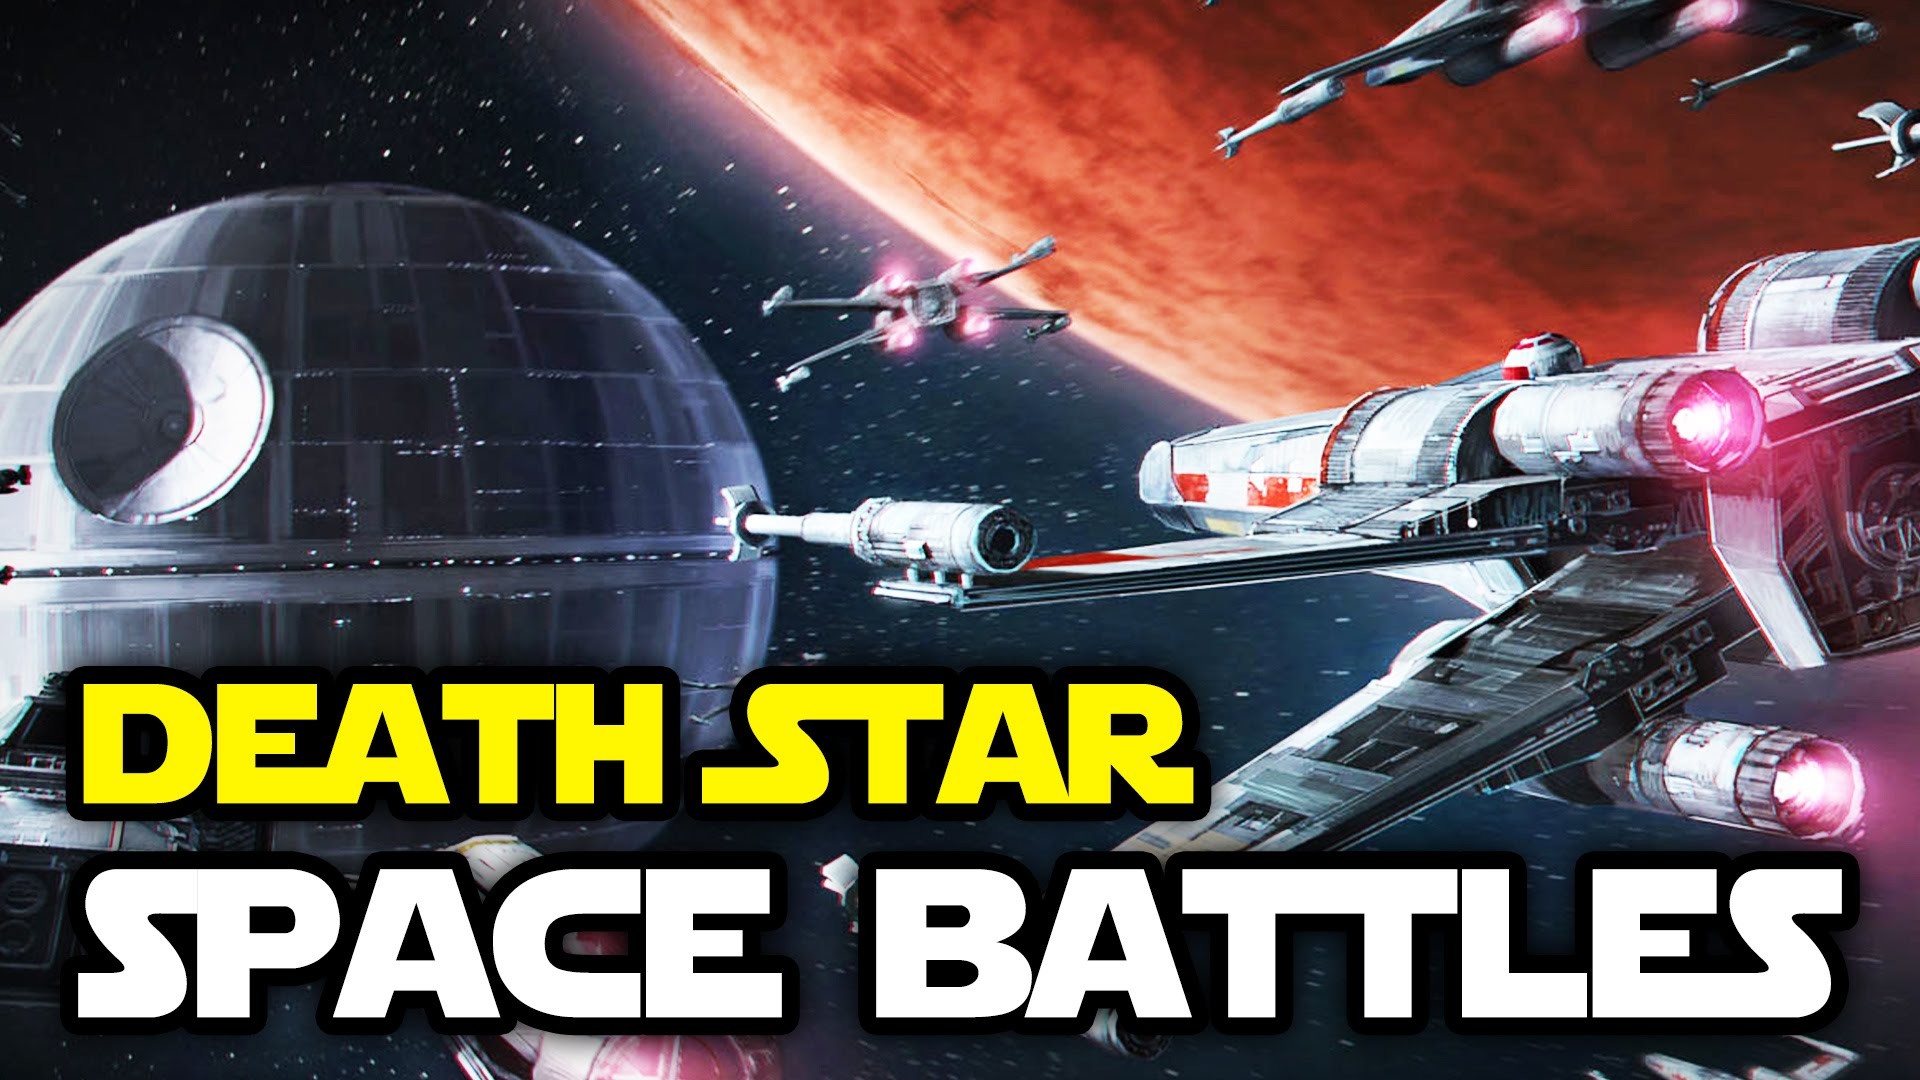 1920x1080 Star Wars Battlefront Talk: Space Battles in the Death Star DLC Featuring  Fighter Squadron Gameplay - YouTube